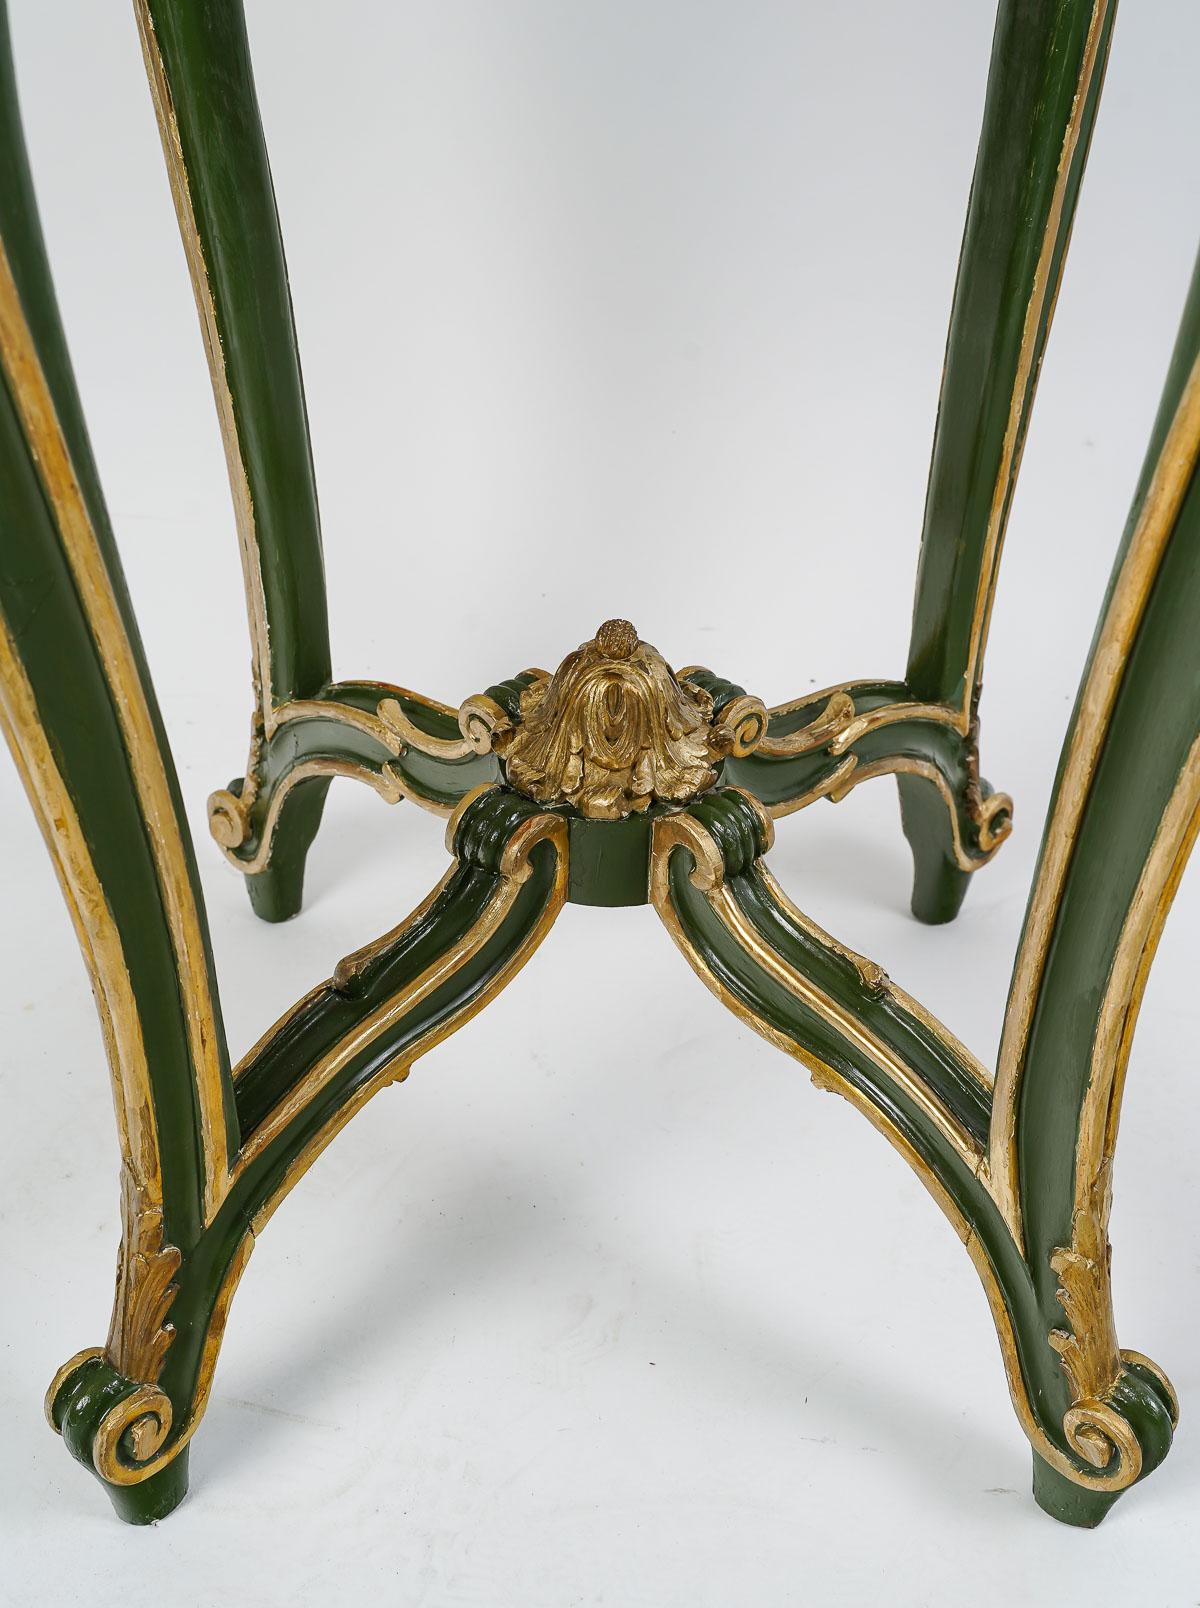 Carved, Painted and Gilded Wood Pedestal Table, Louis XV style. For Sale 2